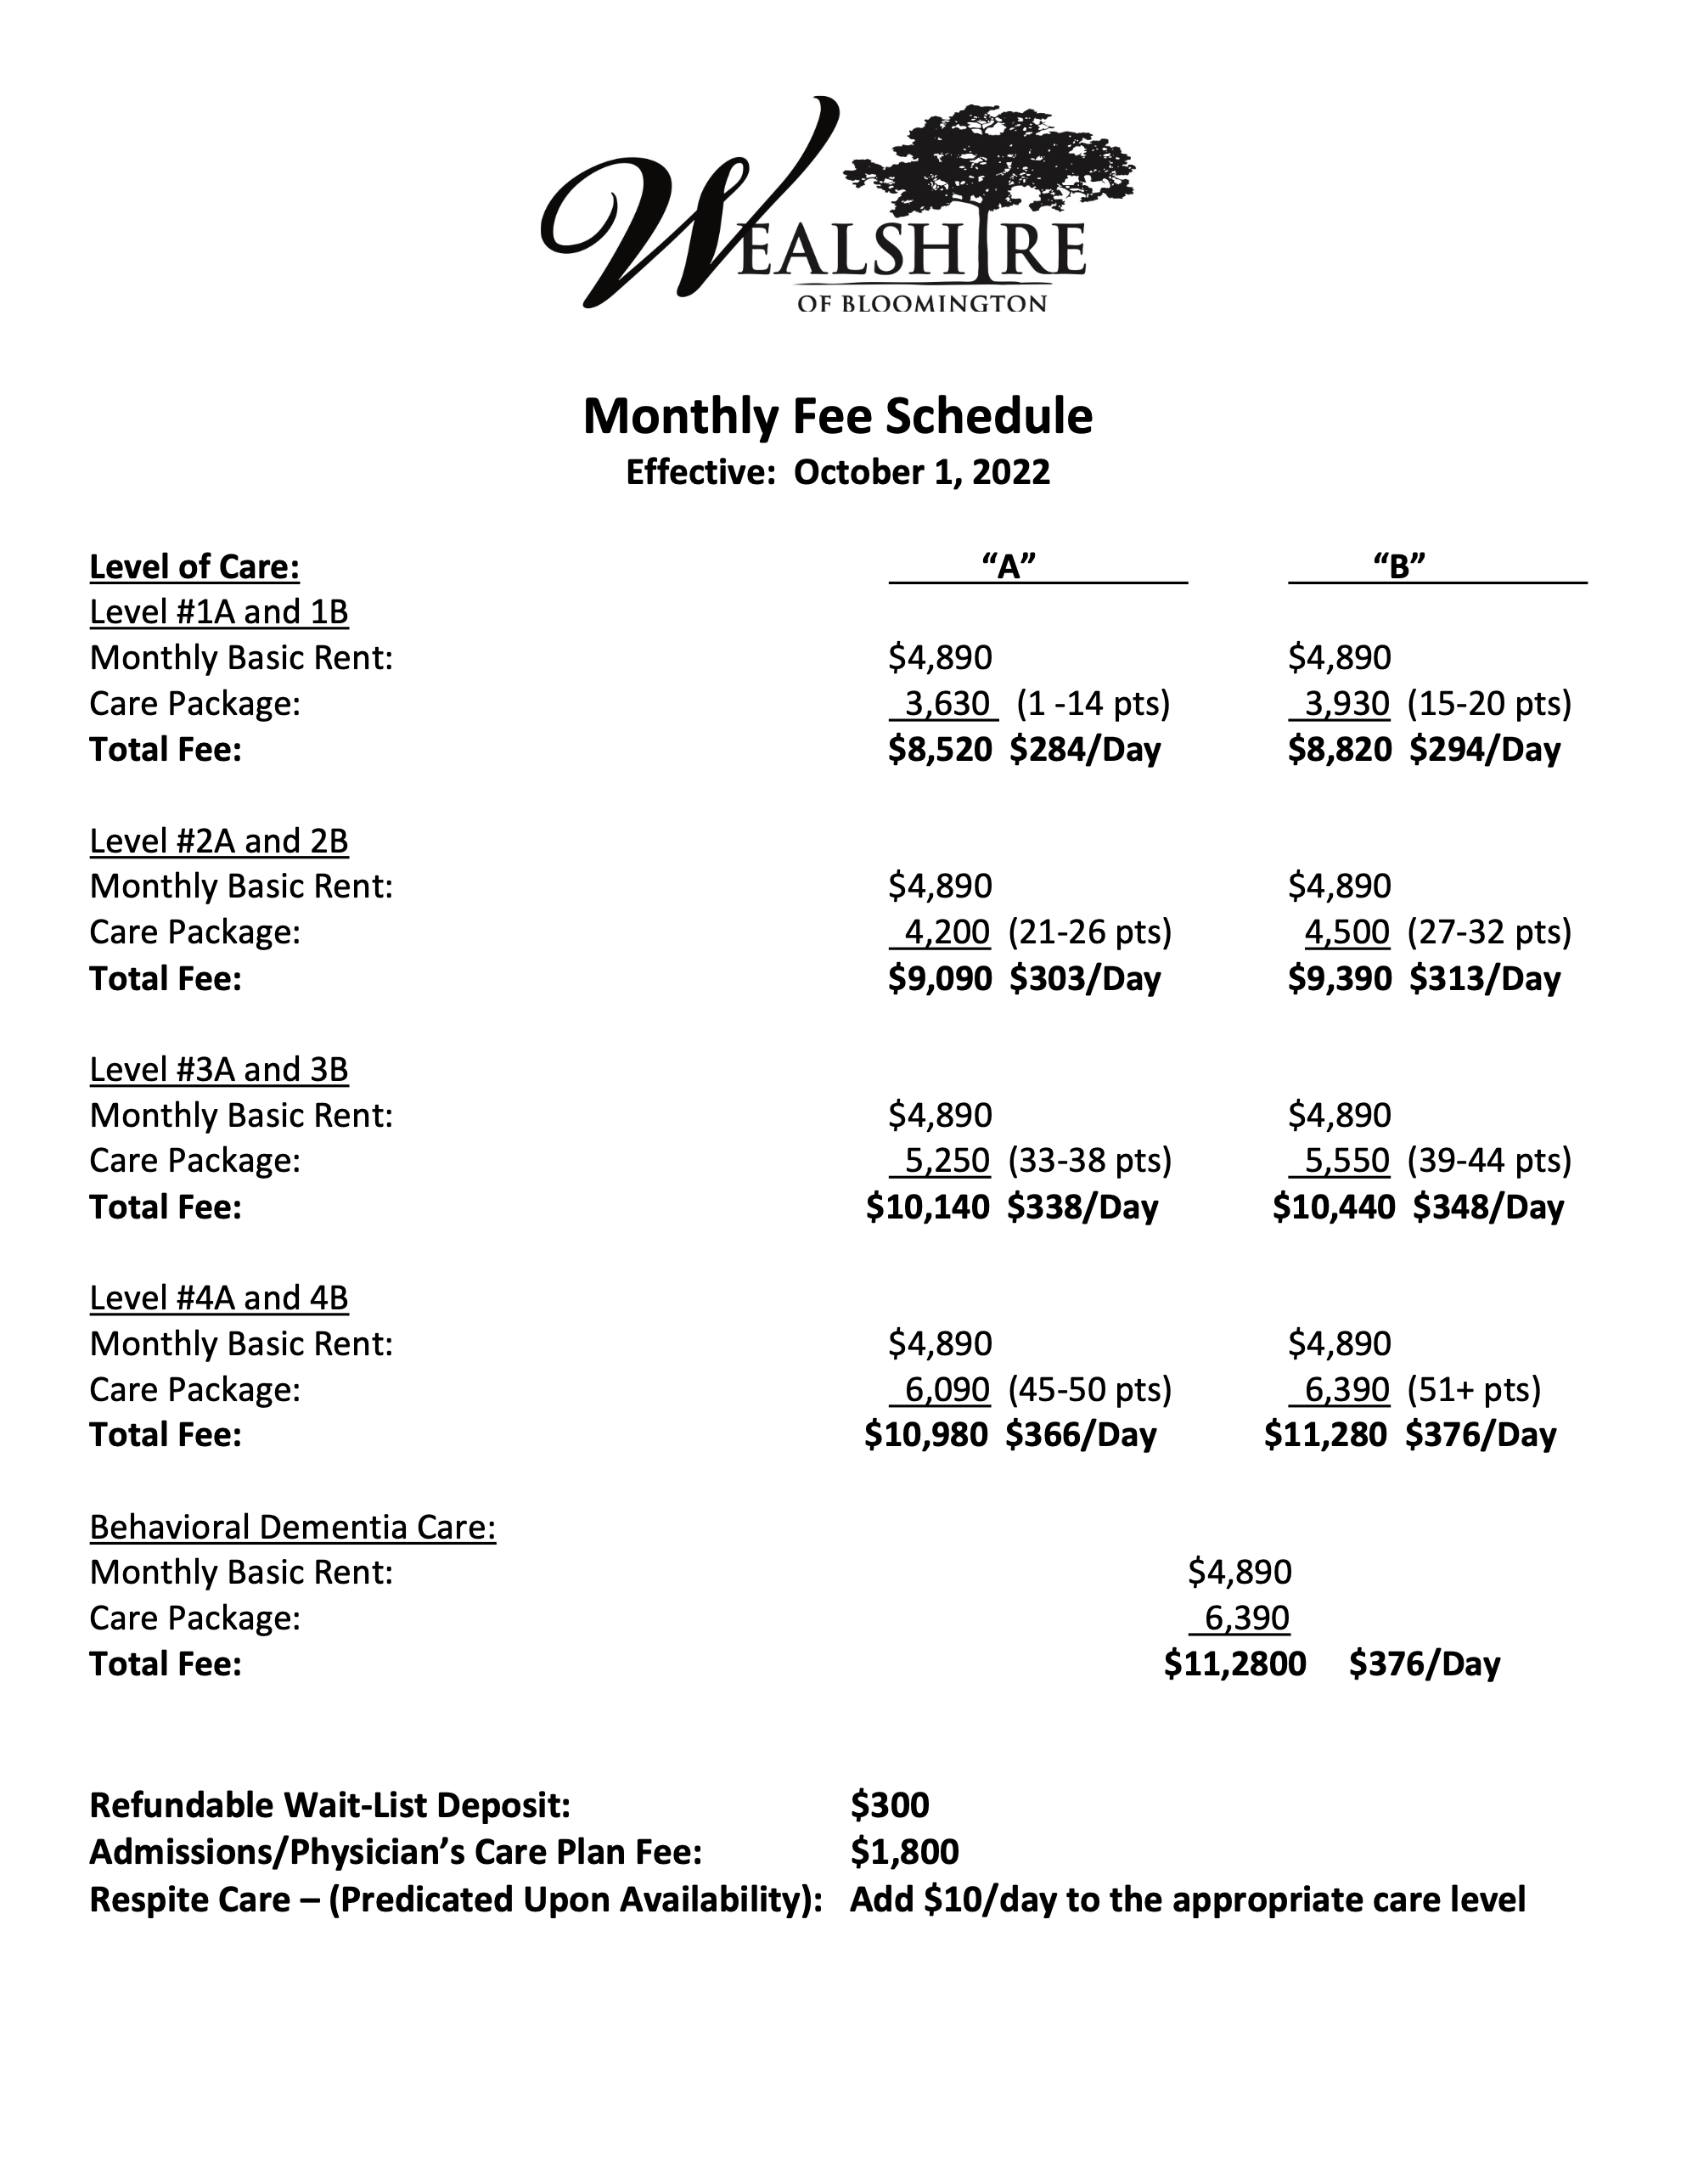 Wealshire of Bloomington Fees